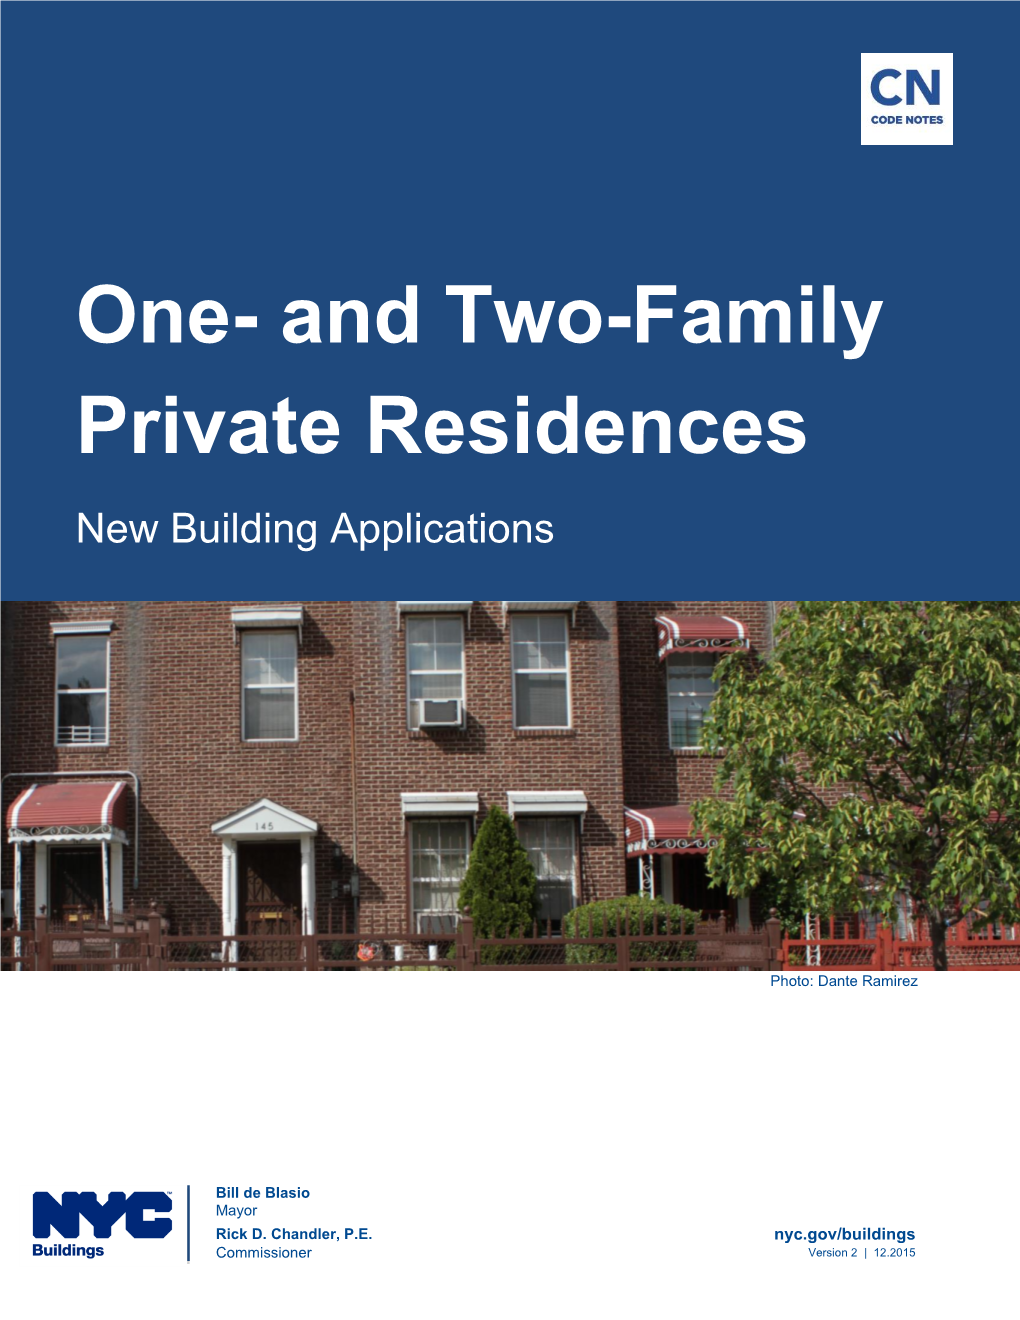 One- and Two-Family Private Residences New Building Applications